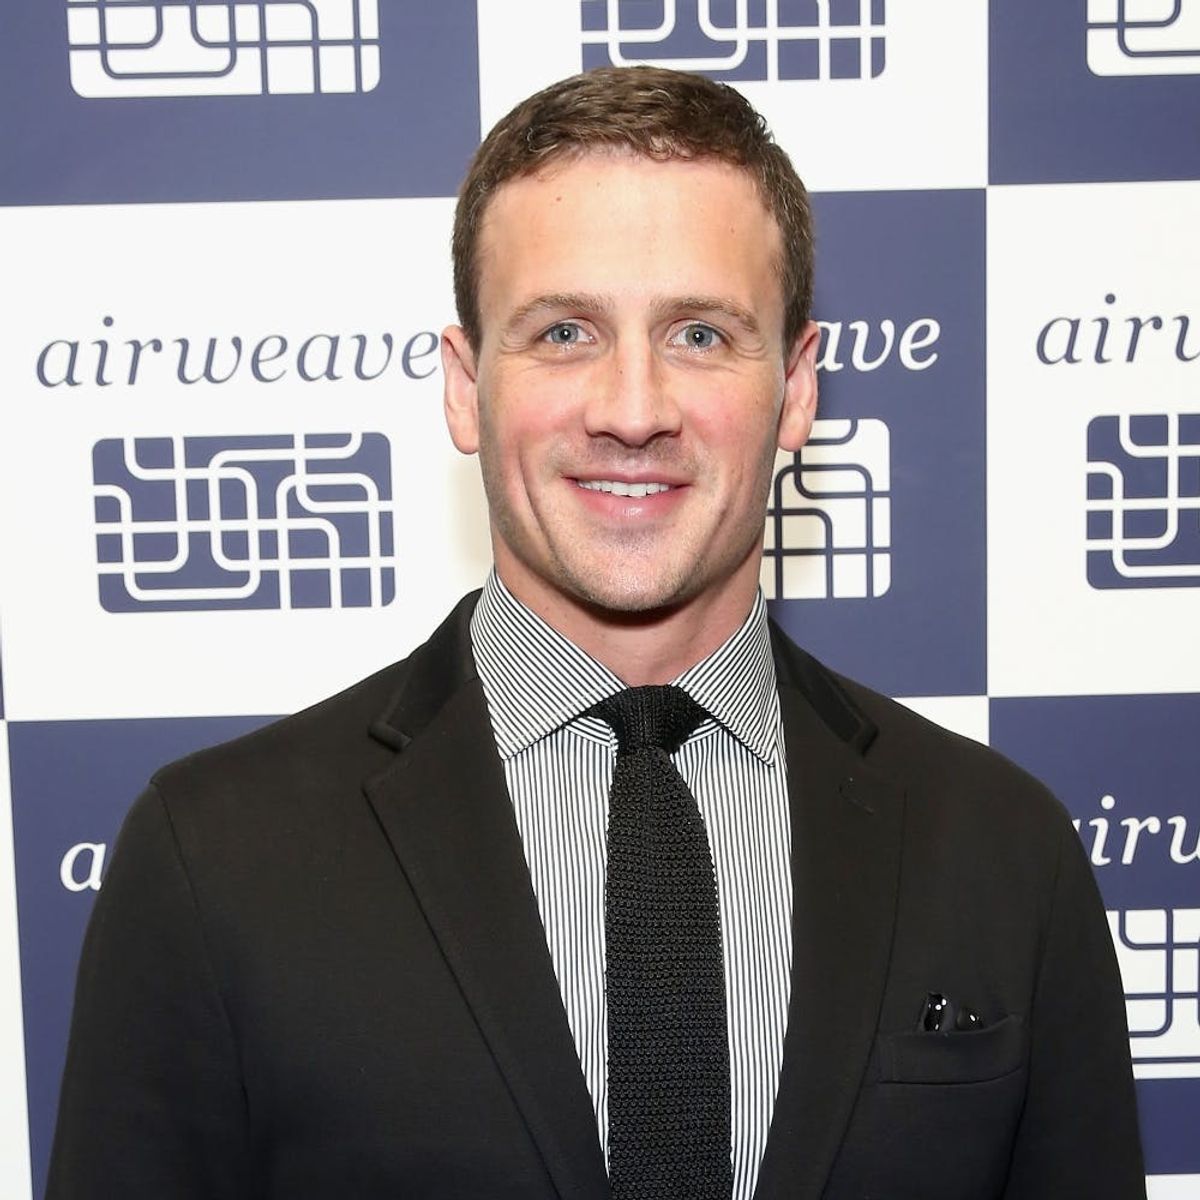 Ryan Lochte’s Teammates Have Their Say in the Rio Robbery Scandal